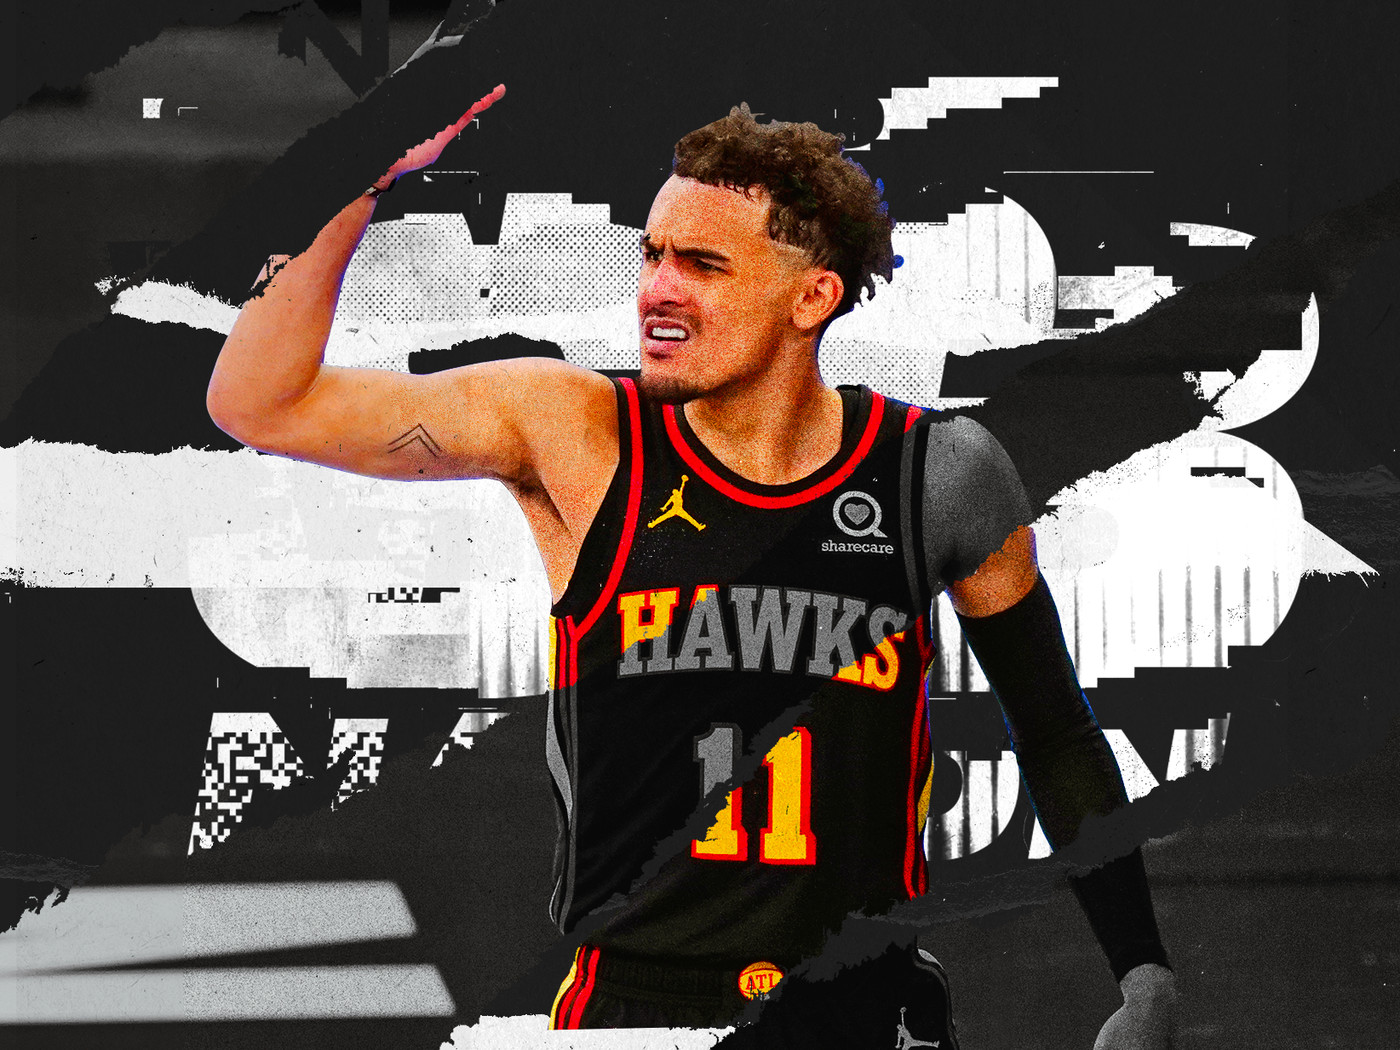 trae young wallpaper